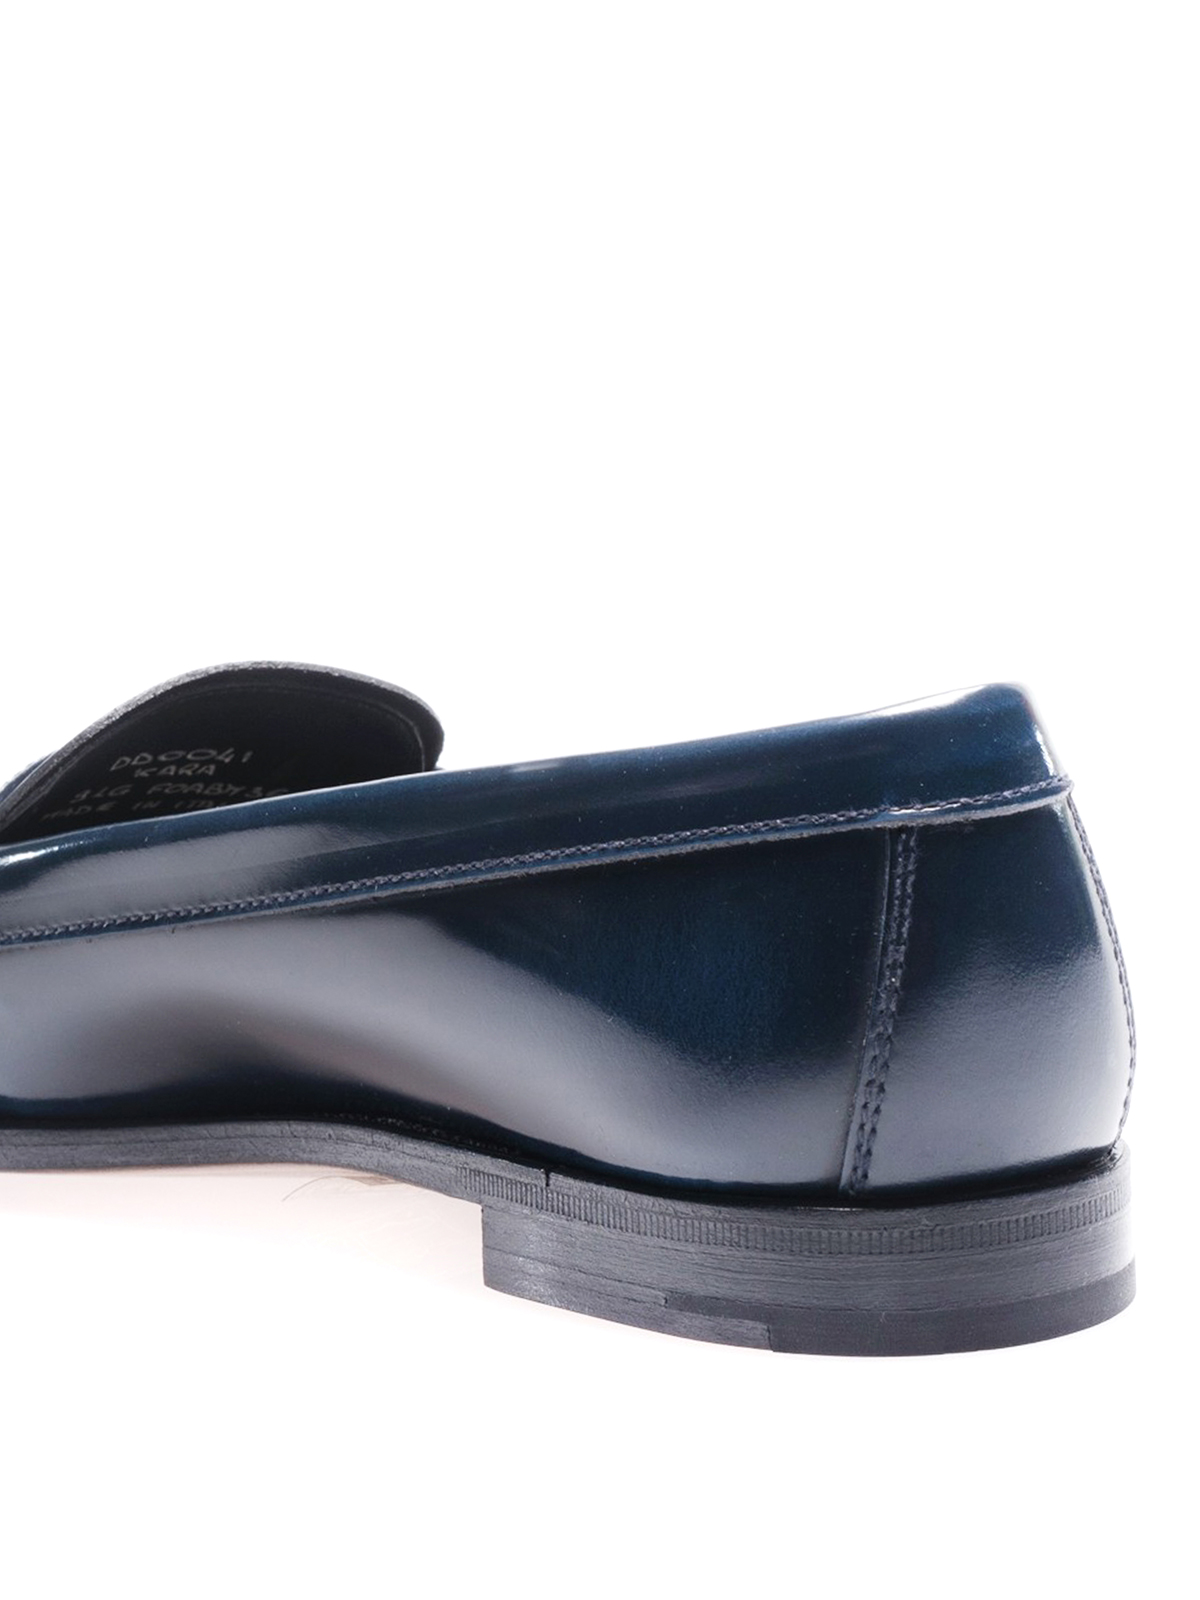 Loafers & Slippers Church's - Kara blue brushed leather loafers